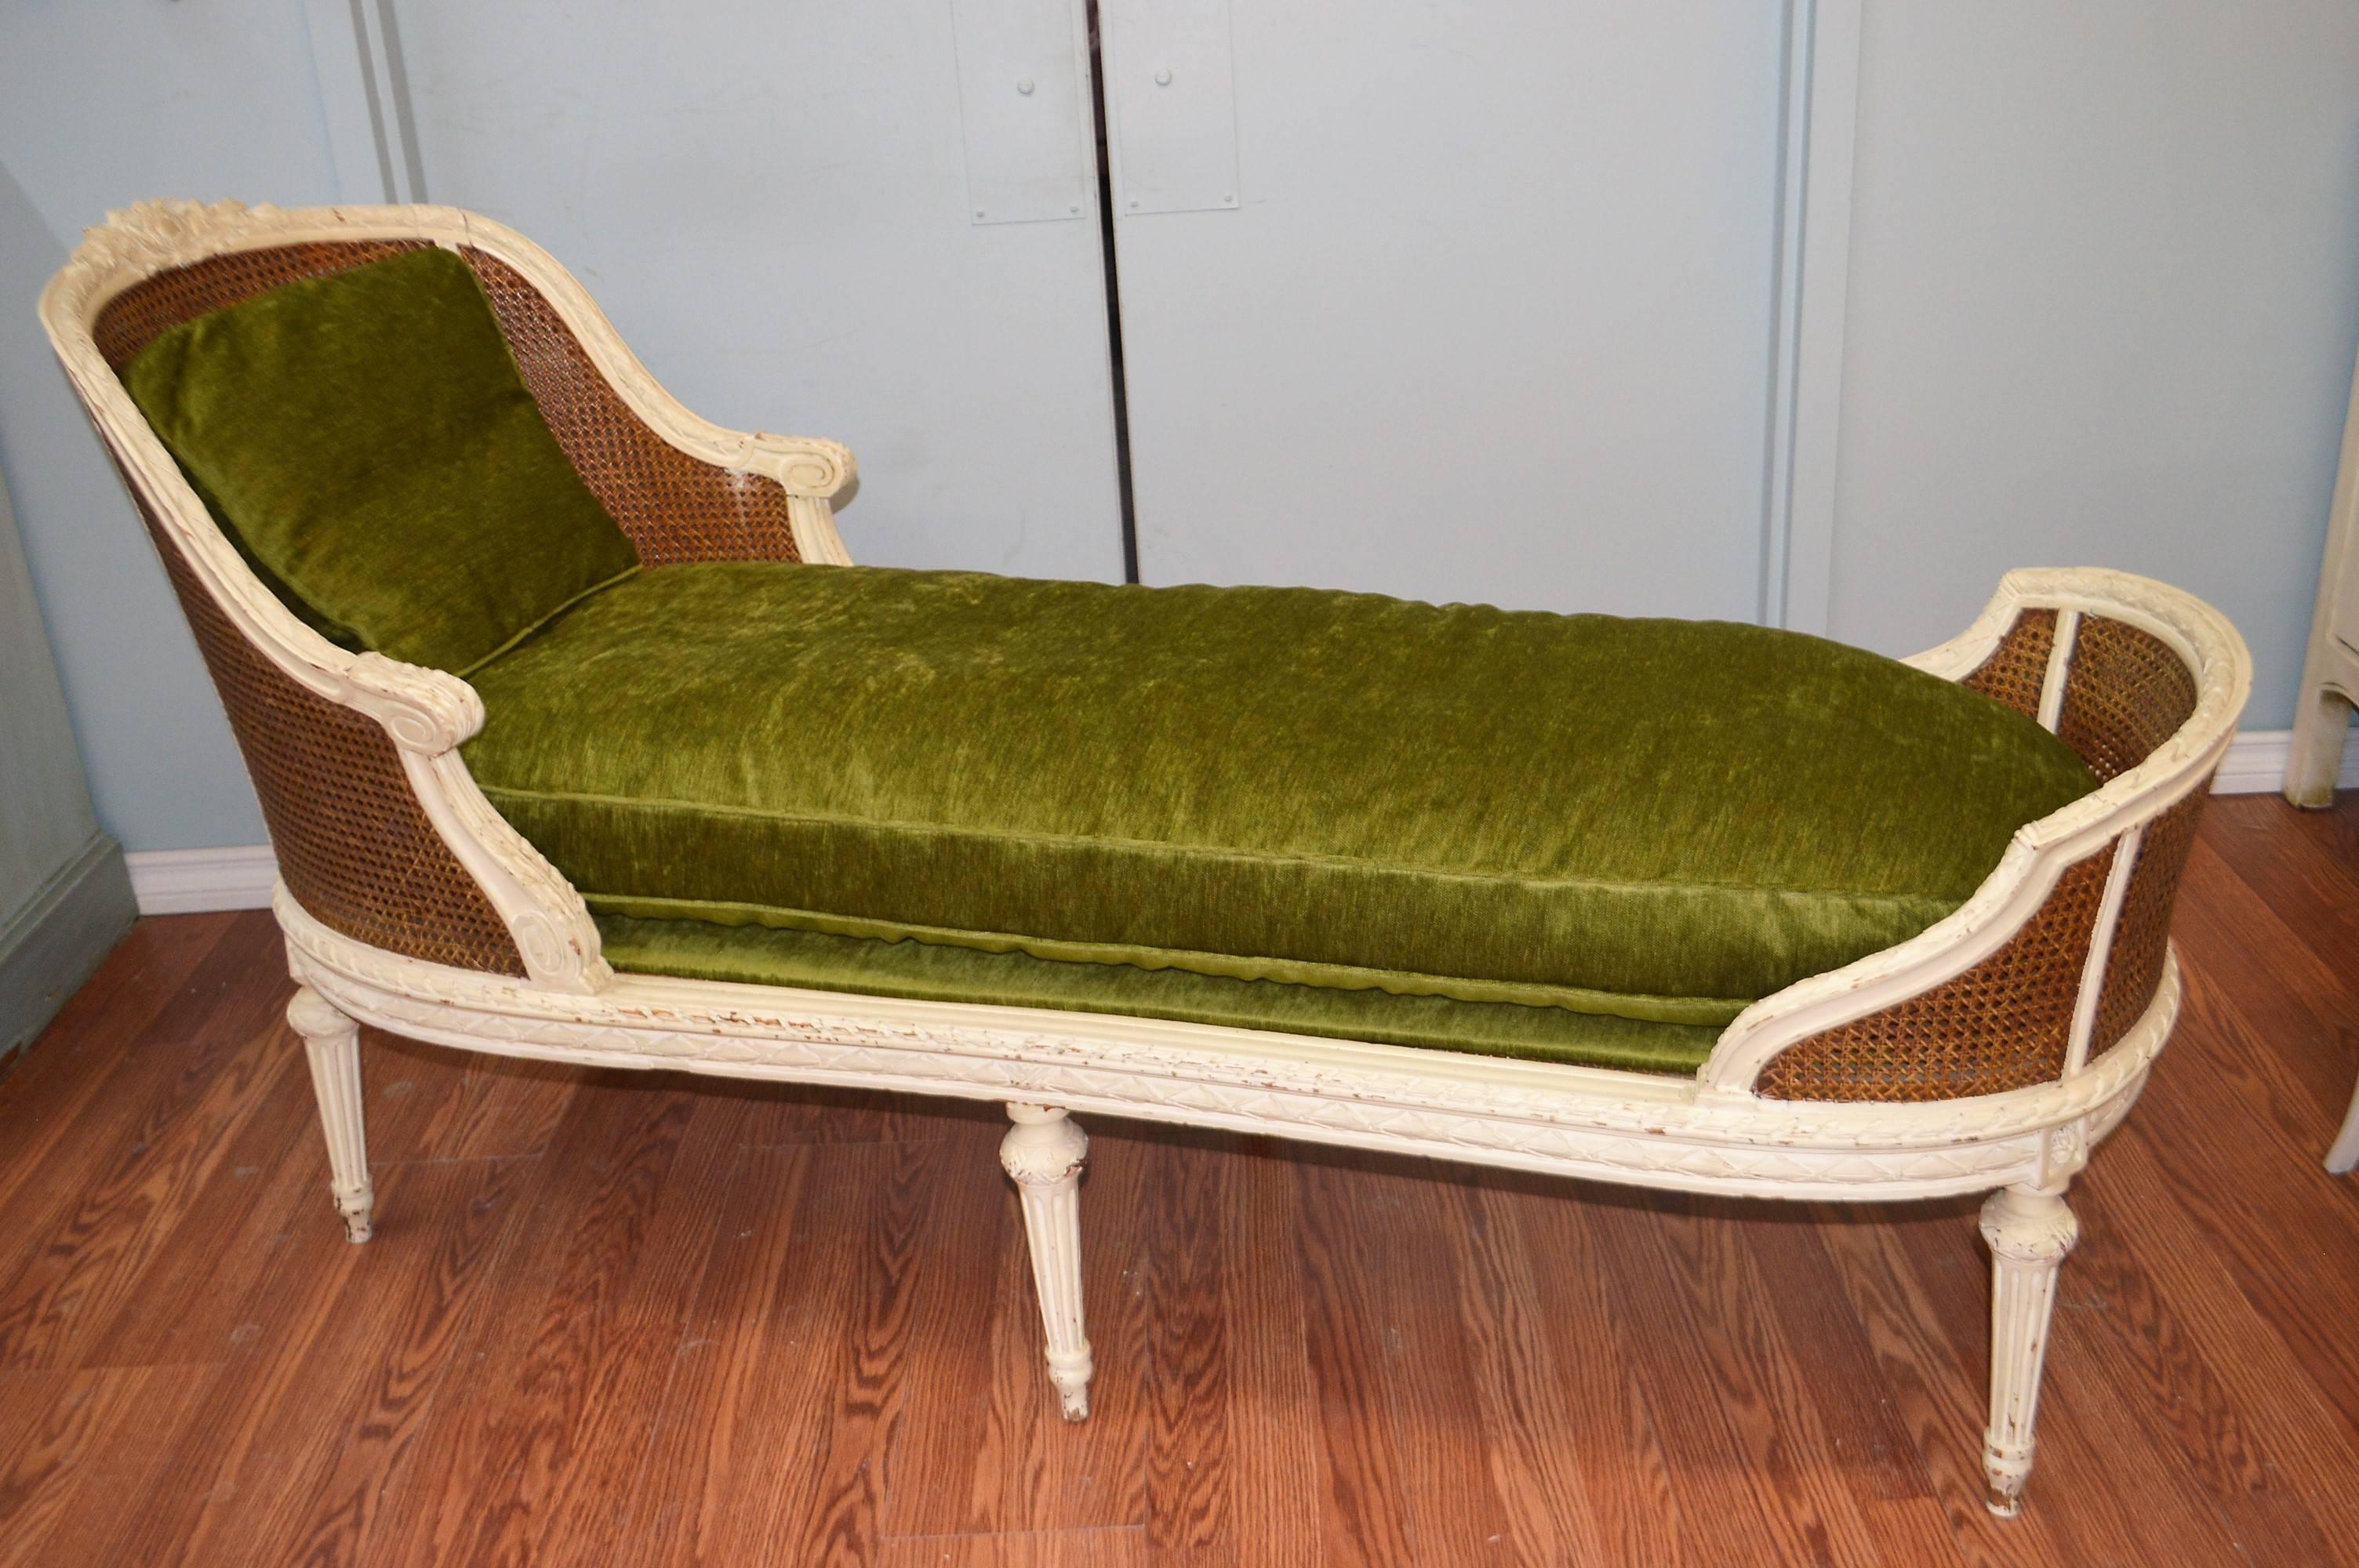 19th century Louis XVI style Chaise Longue In Excellent Condition For Sale In Oakville, ON